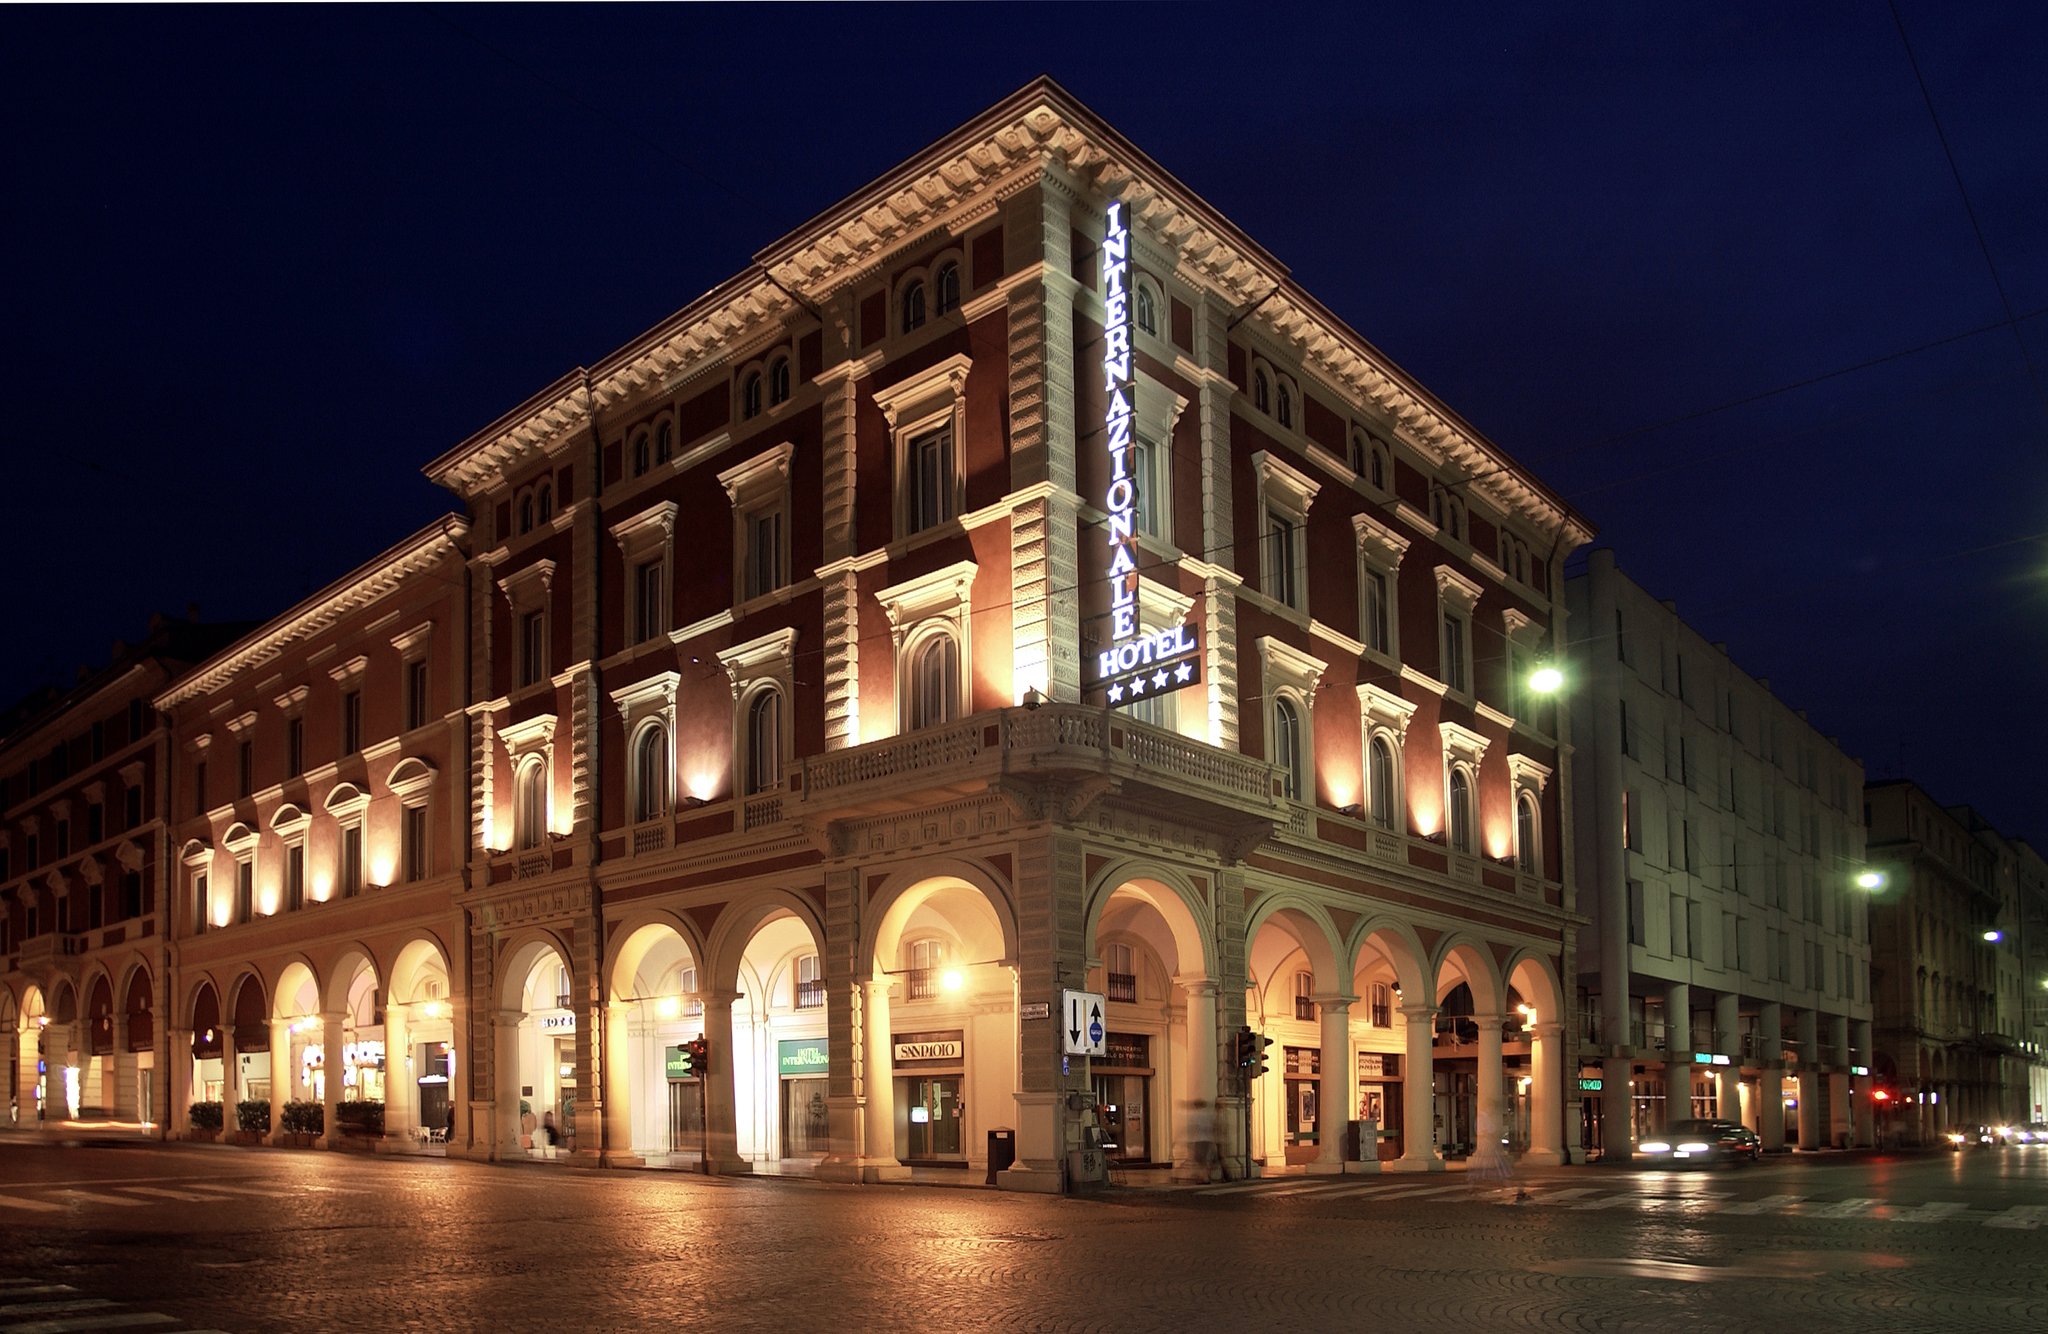 Hotel Internazionale- Bologna, Italy Hotels- First Class Hotels in